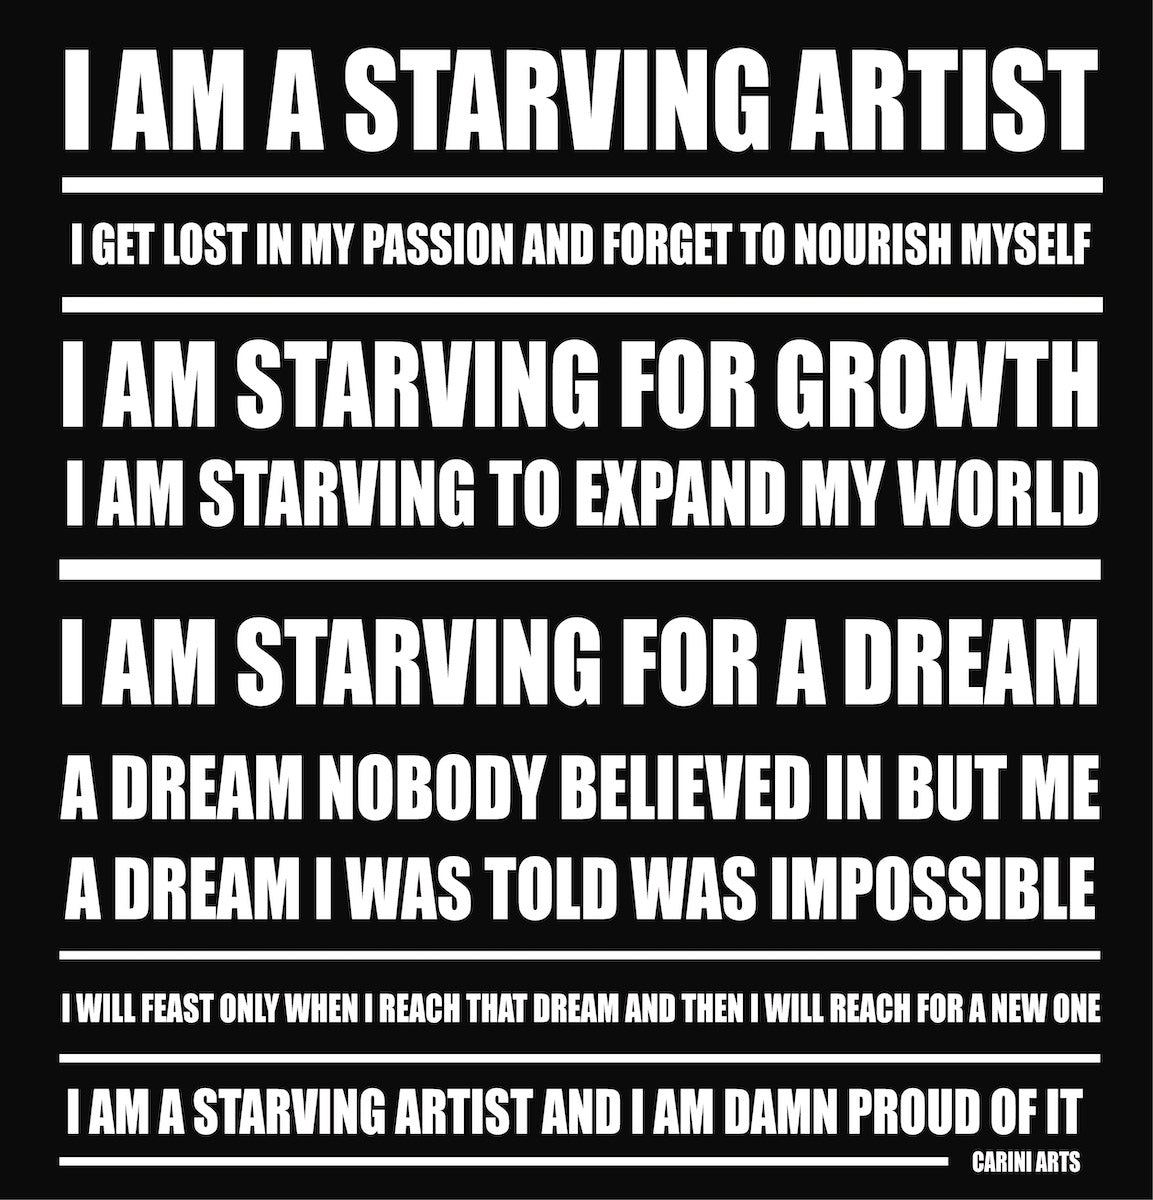 starving artist tee by carini arts